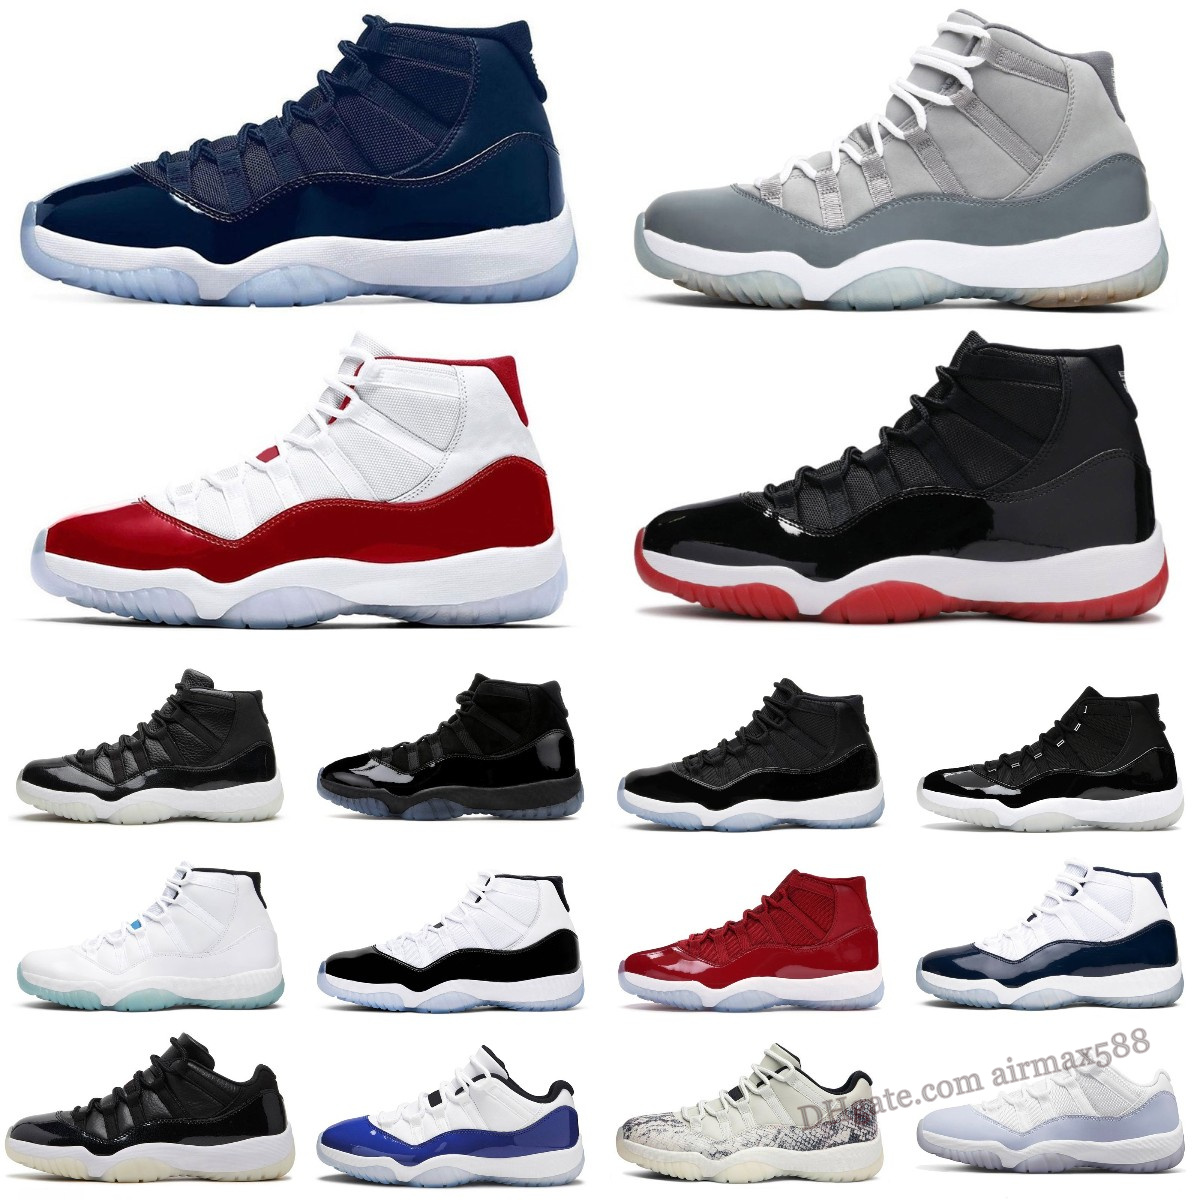 

With Box retro 11 Basketball Shoes Men Women 11s Cherry Midnight Navy Cool Grey 25th Anniversary 72-10 Low Concord Bred low Pure Violet Mens Trainer Sport Sneakers 36-47, Bubble column